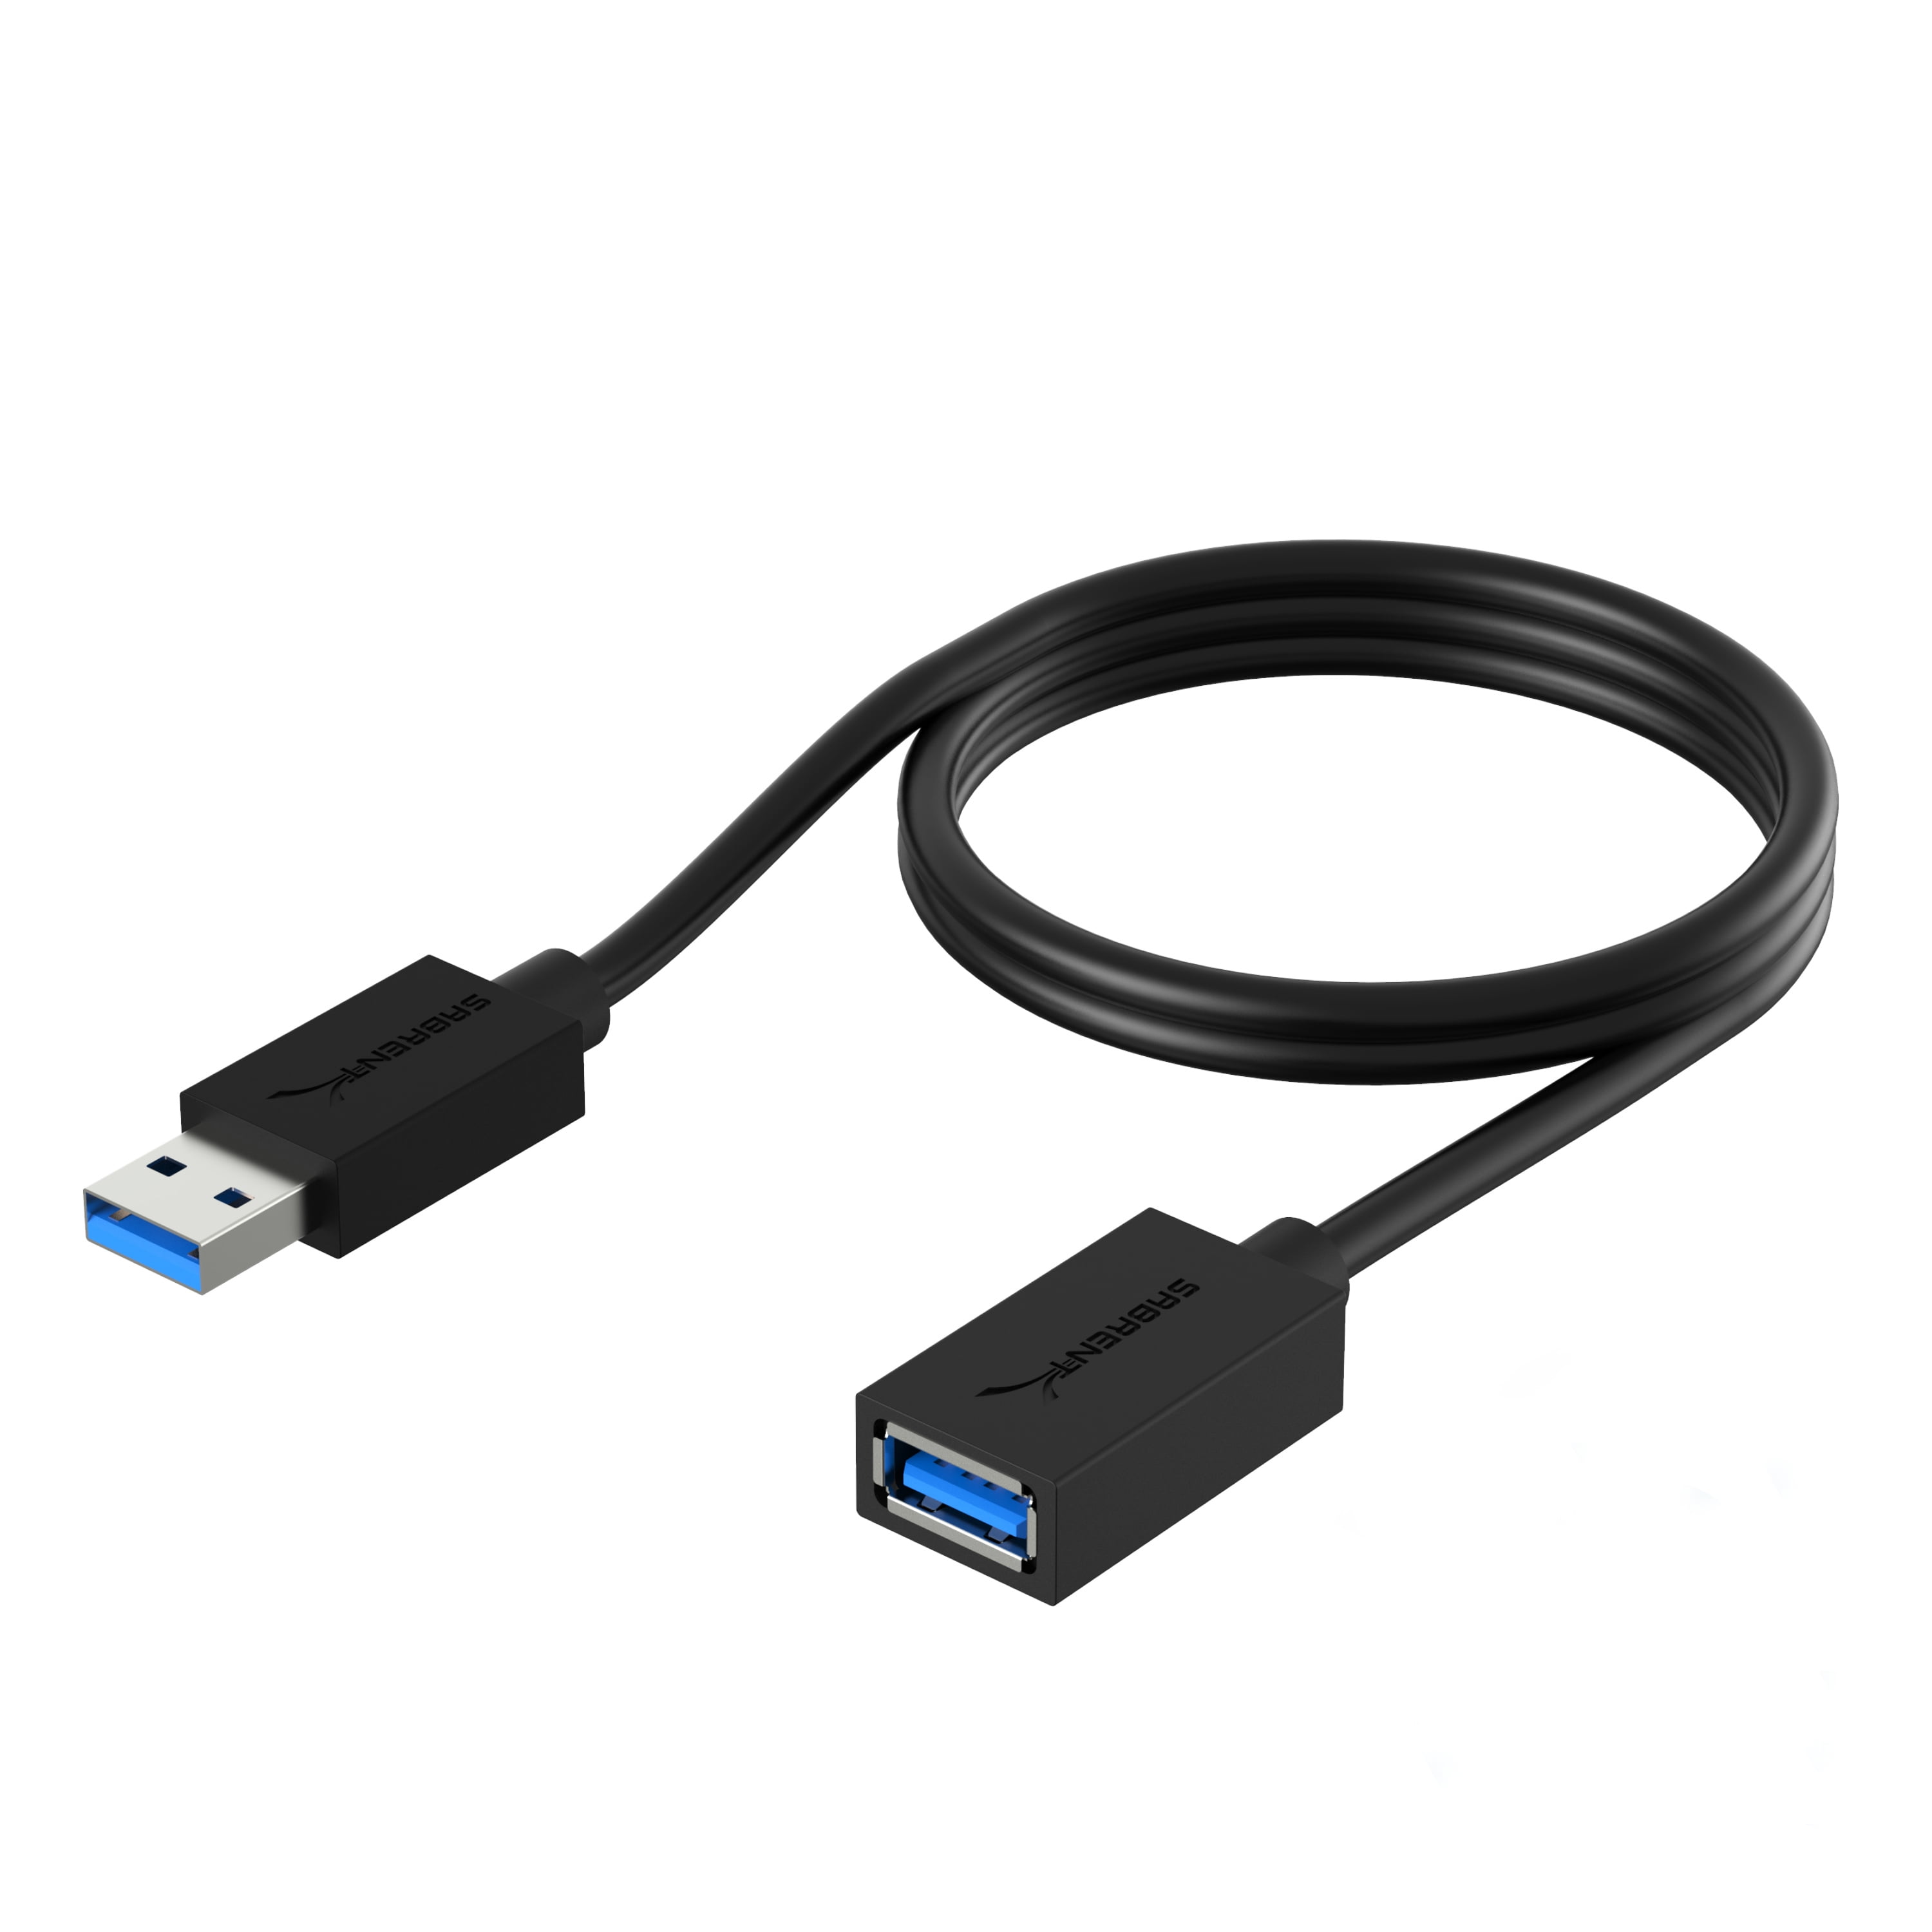  Cable Matters 2-Pack Micro USB 3.0 Cable 6 ft